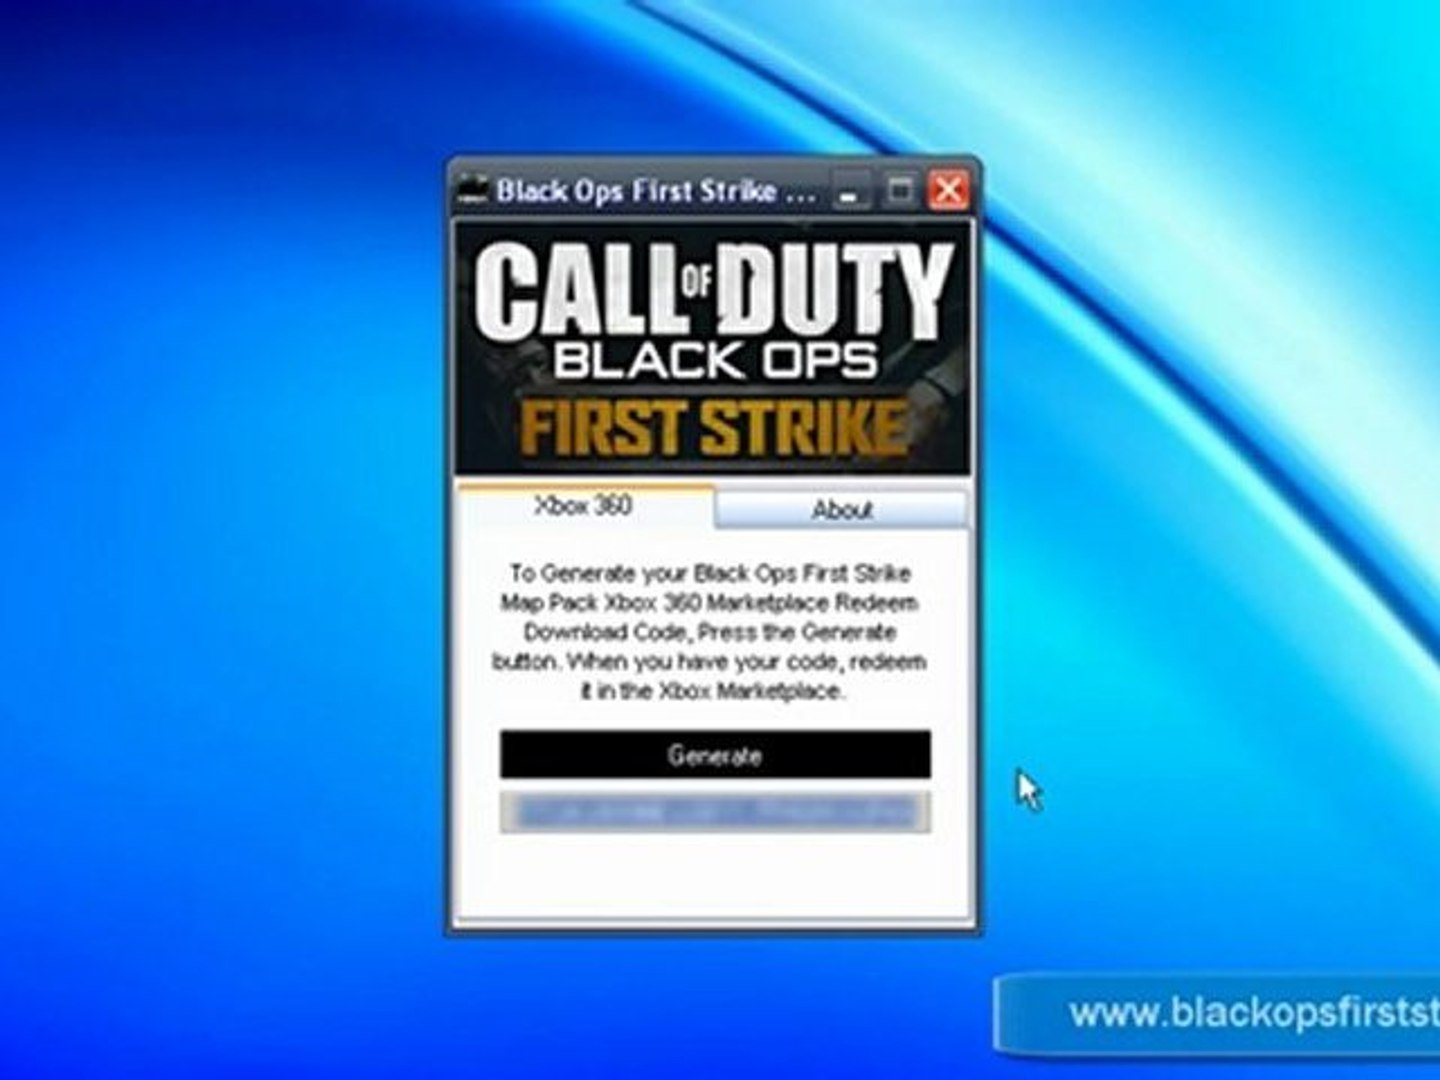 How to Downlaod Black Ops First Strike - Xbox 360 Crack - video Dailymotion